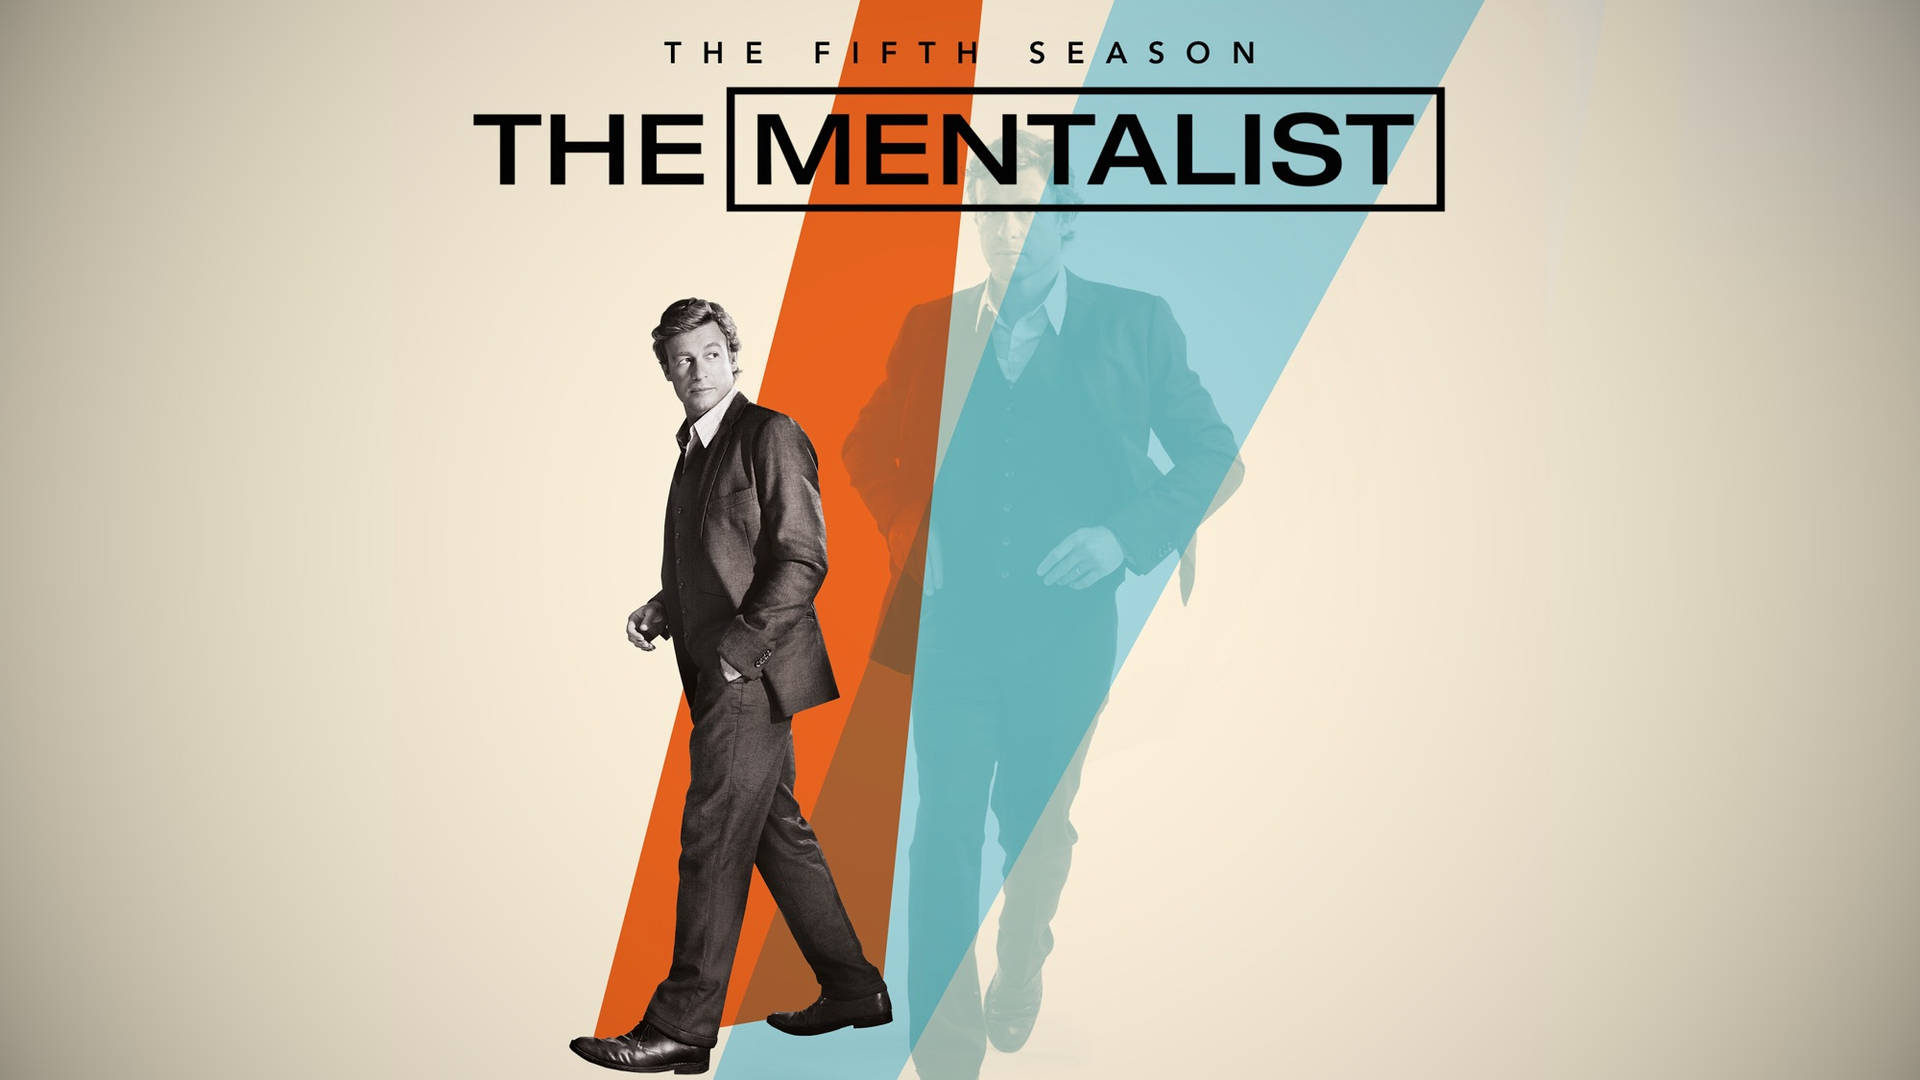 The Mentalist The Fifth Season Poster Background